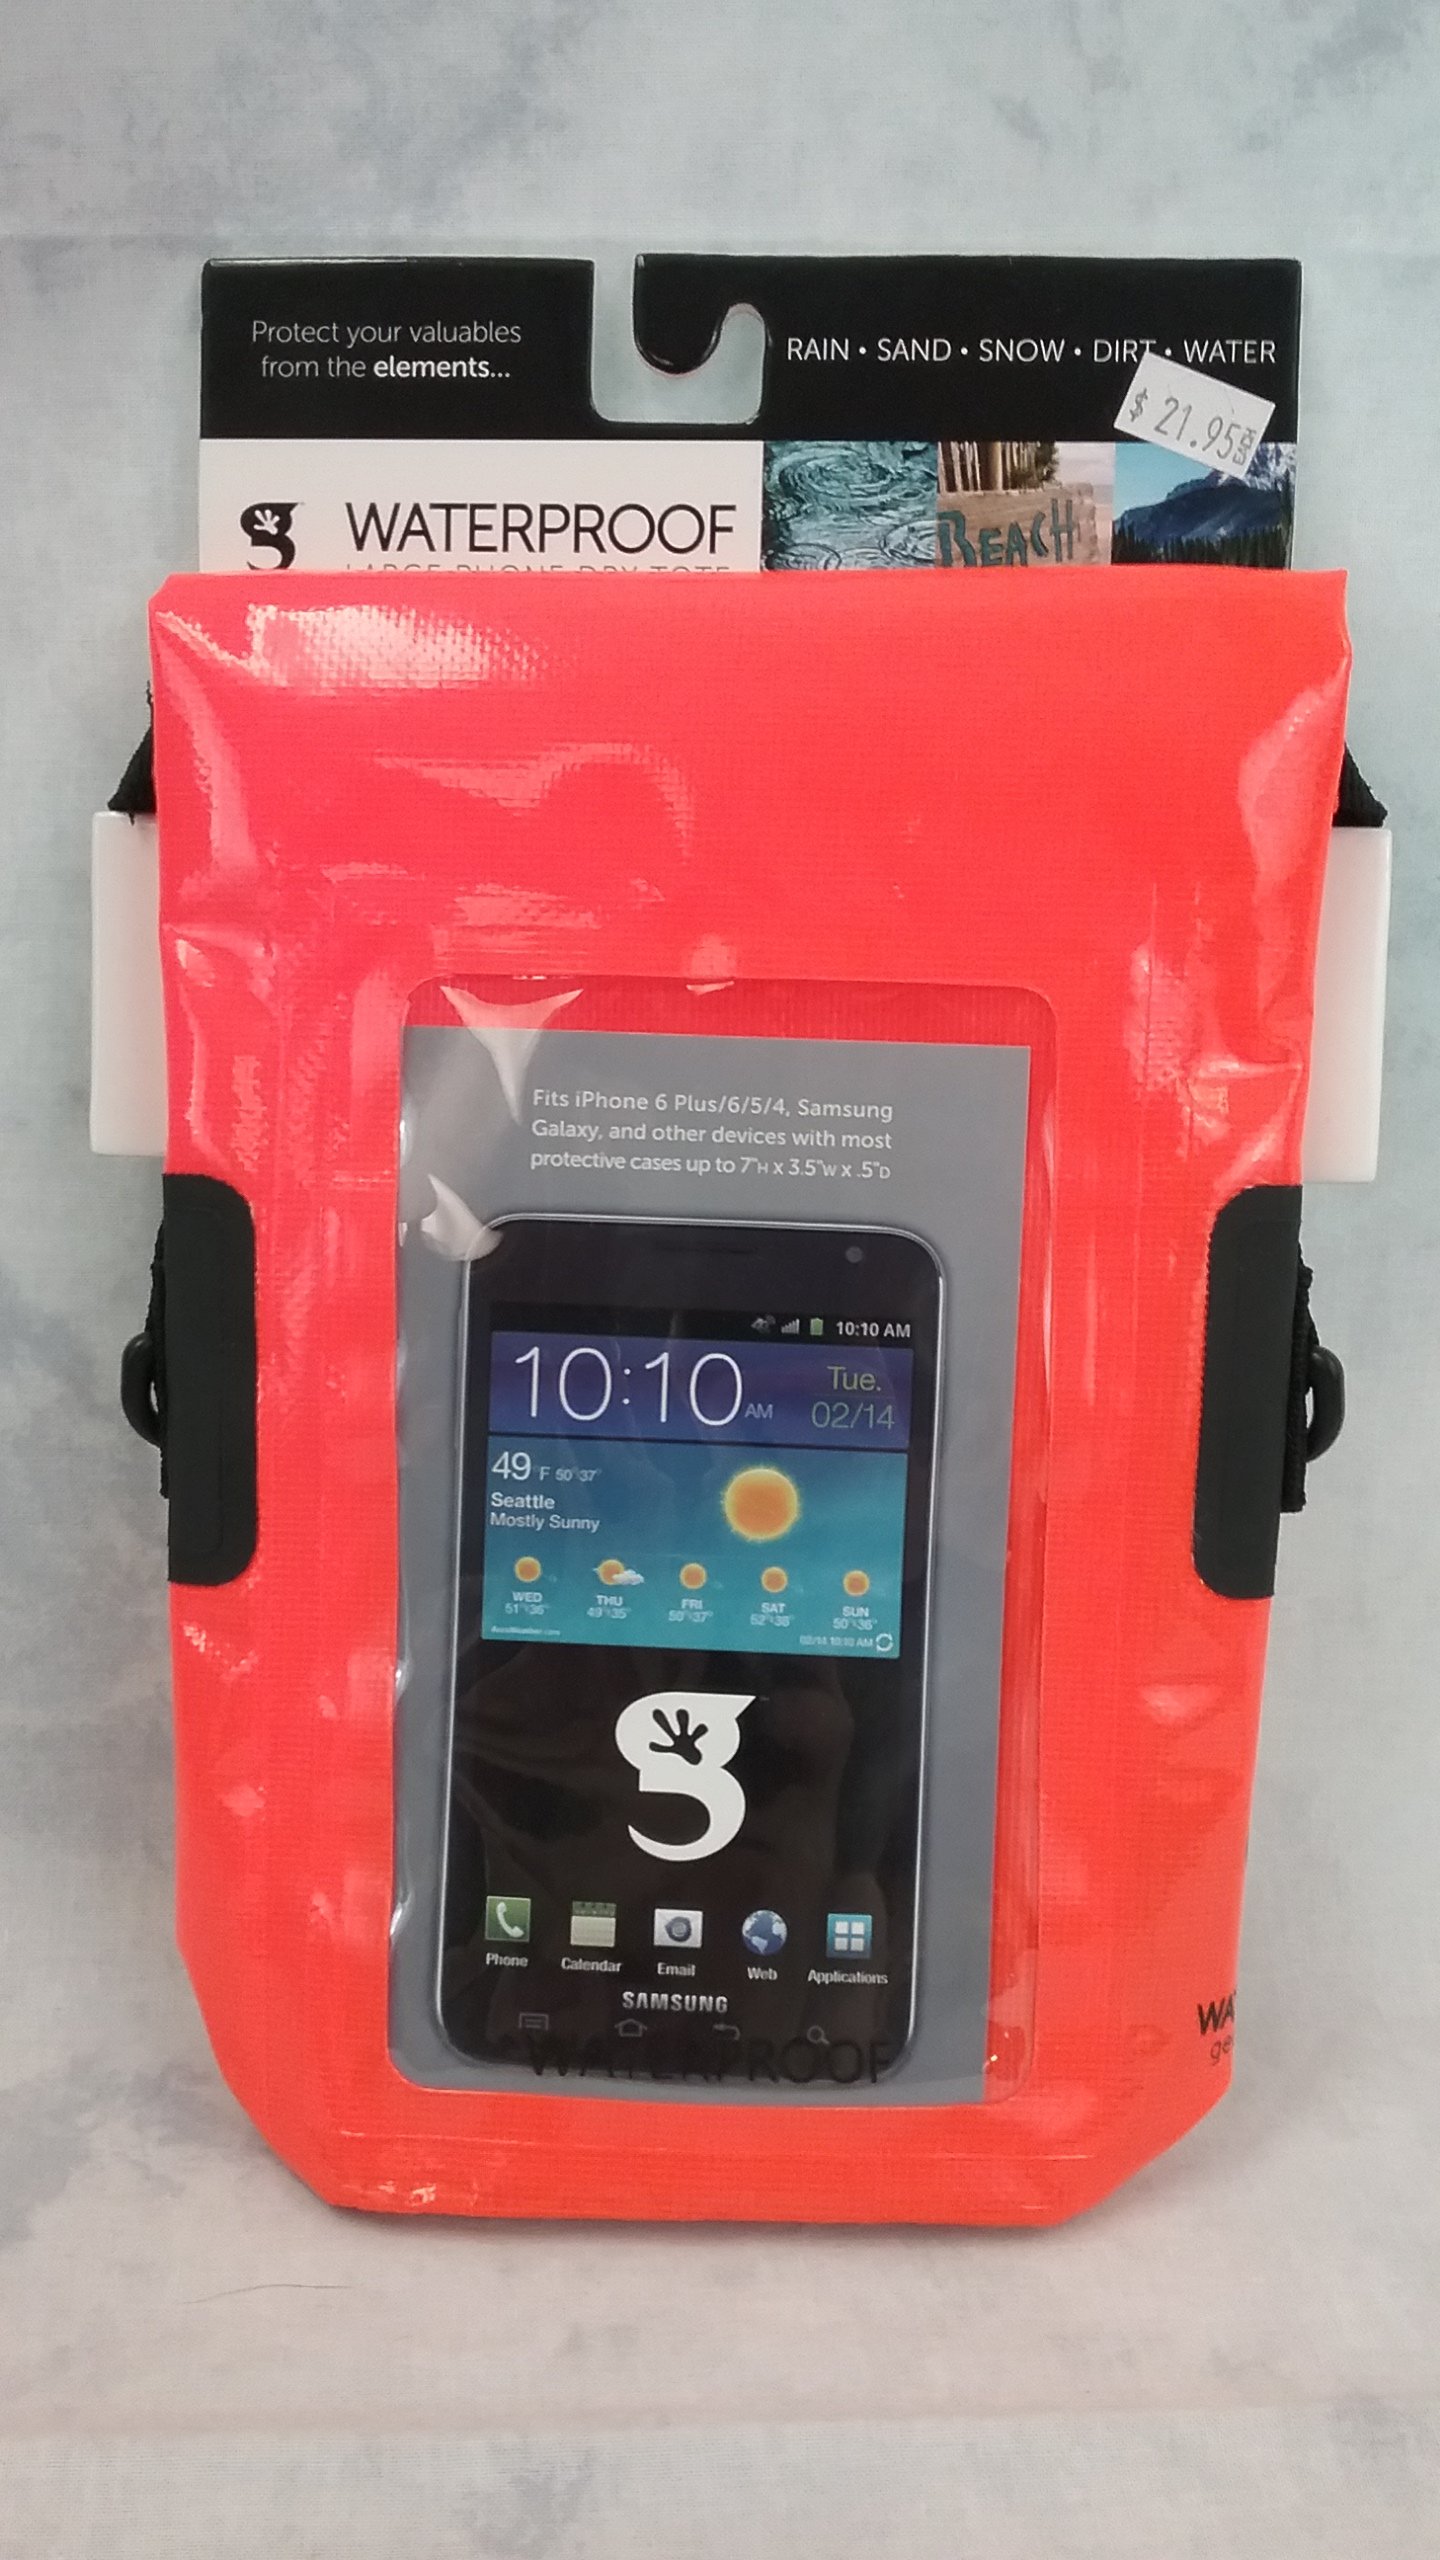 5 Colors Available. Use your device, plus protect your small valuables. Includes shoulder strap and belt loop. Designed for iPhone 6 Plus and smaller.

•Store your small valuables, plus text, talk, play games, email and surf the web on your device with protection from RAIN, SAND, DIRT, WATER and SNOW.
•Fits iPhone 6 Plus/6/5/4, Samsung Galaxy and other devices with most protective cases up to 7”h x 3.5”W x .5”D.
•Tote dimensions when closed: 8inh x 5inw x 2.6ind
•Slide device into front section and firmly zip seal closed.